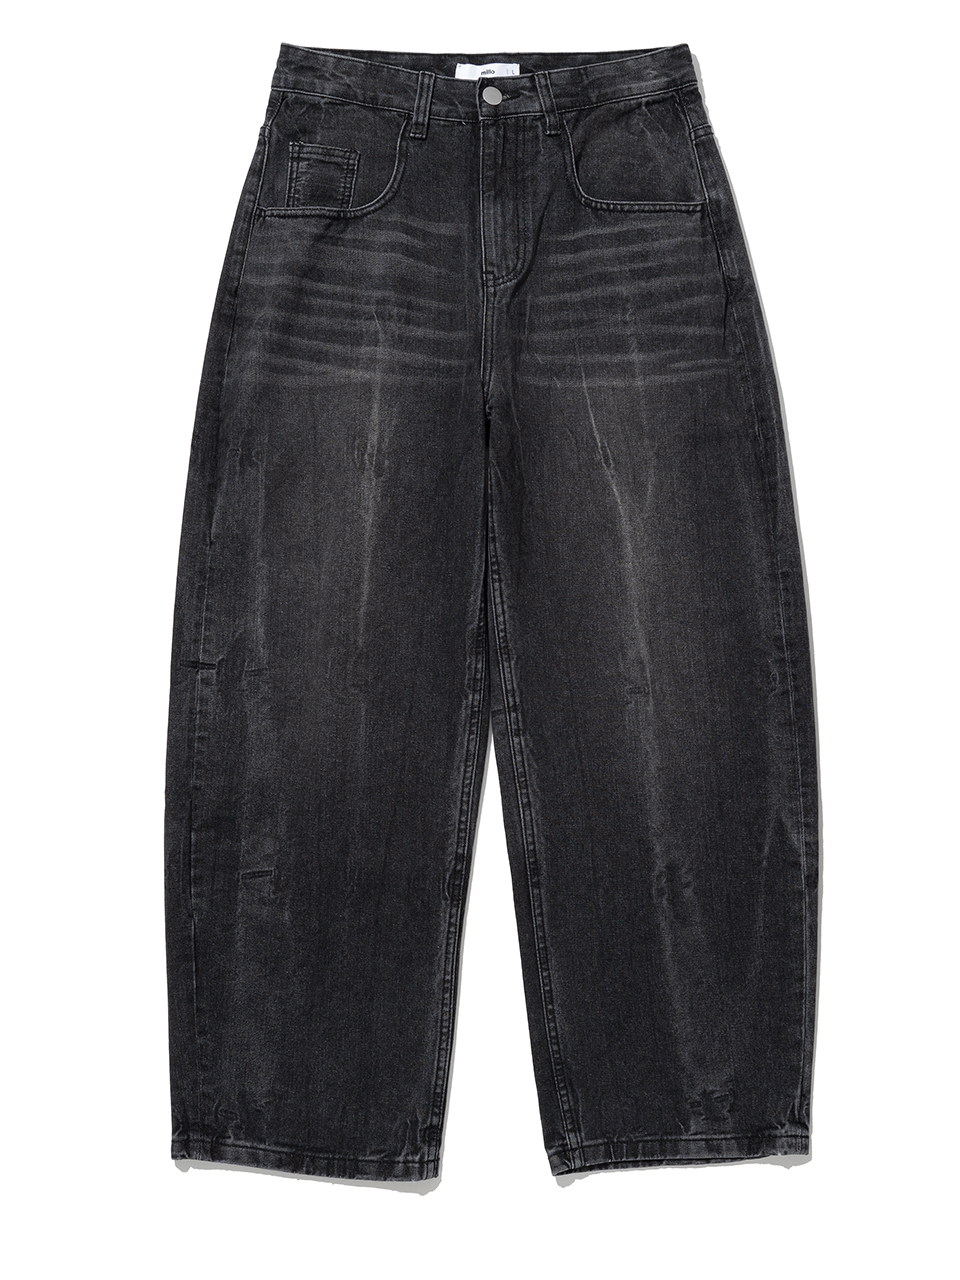 Reflect Curved Pants - Washed Black